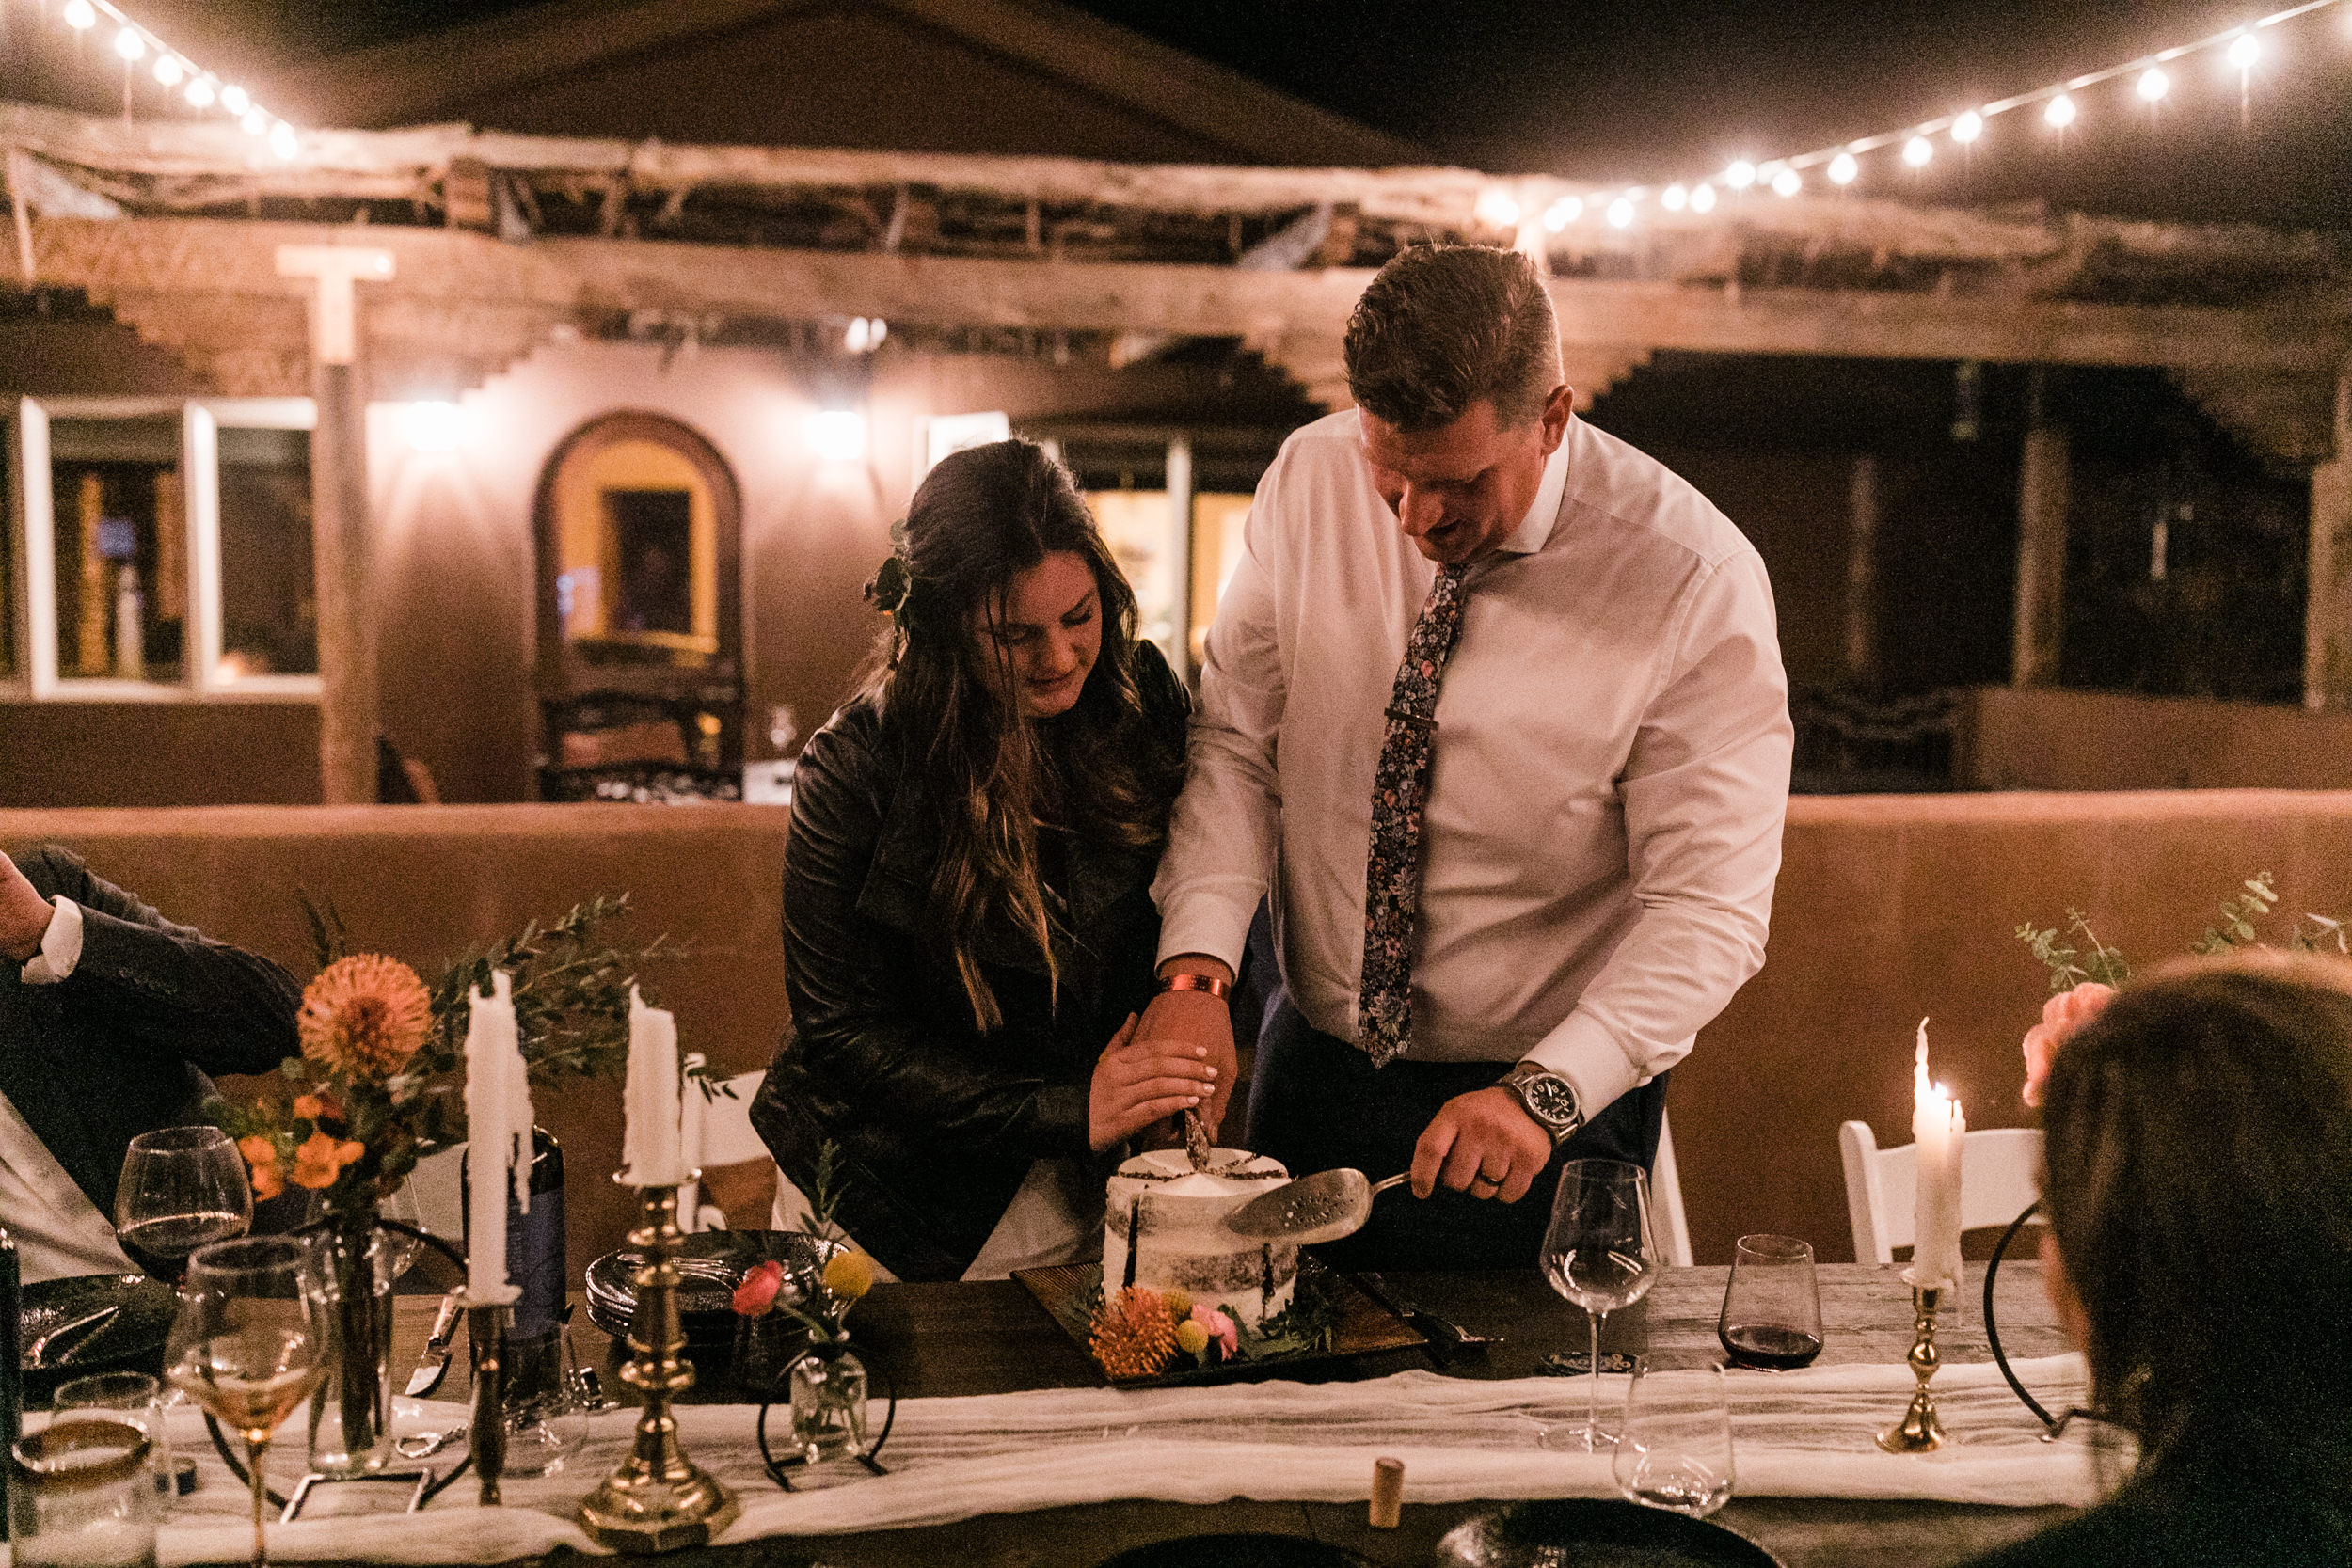 Zion national park elopement photographer | styled small wedding dinner reception in the desert | the hearnes adventure photography